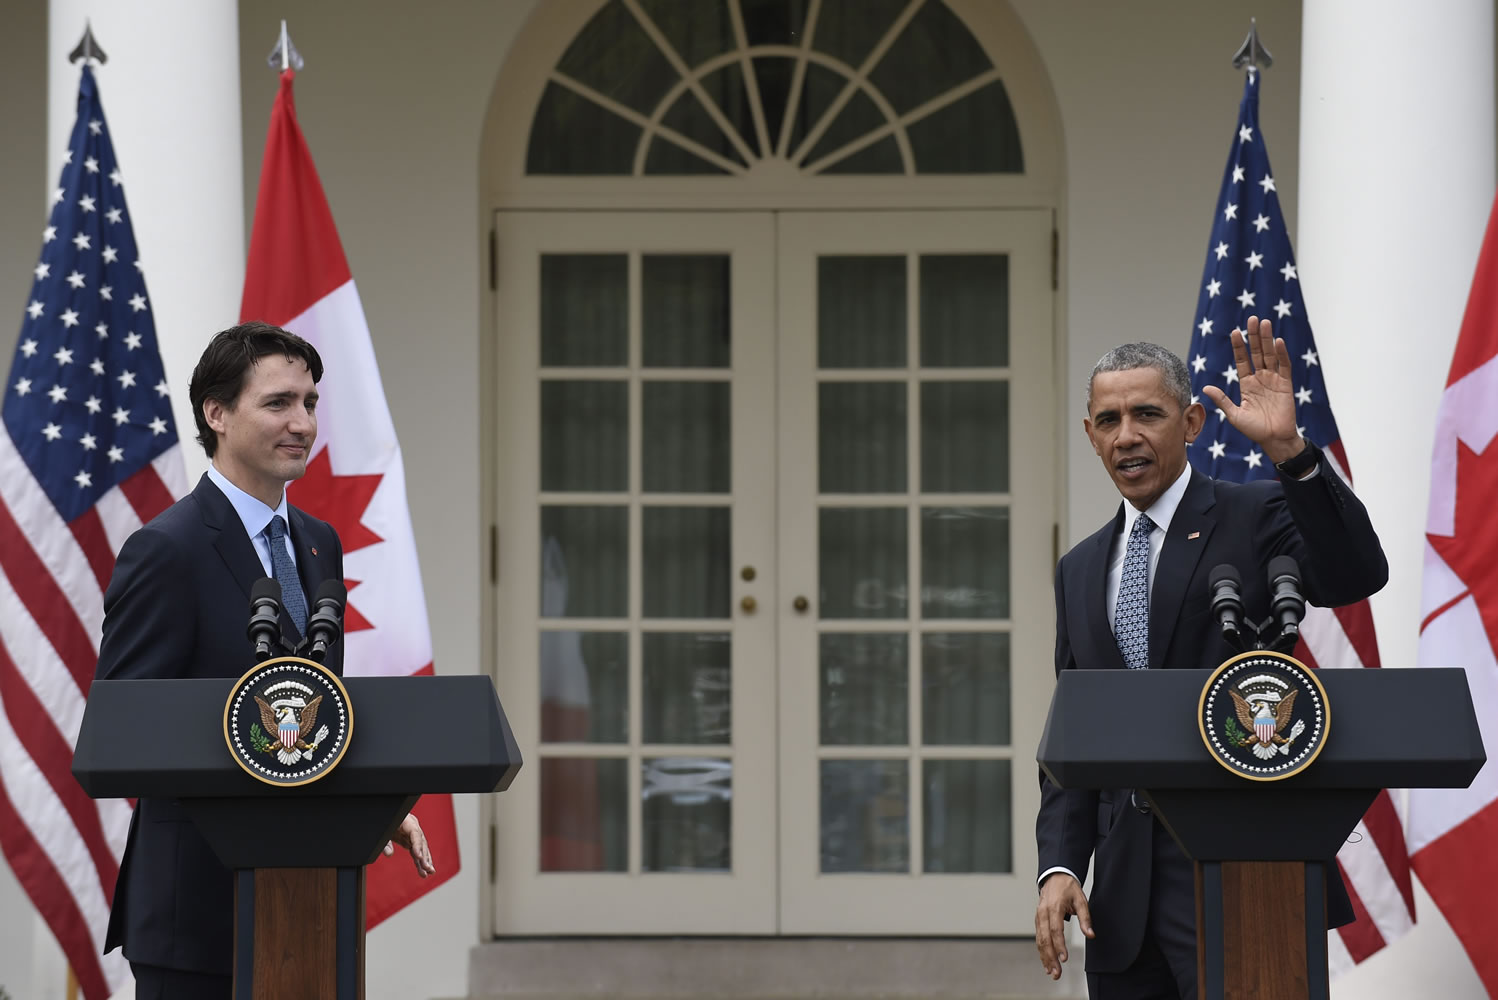 President Barack Obama and Canadian Prime Minister Justin Trudeau conclude their news conference in the Rose Garden of White House in Washington, Thursday, March 10, 2016.